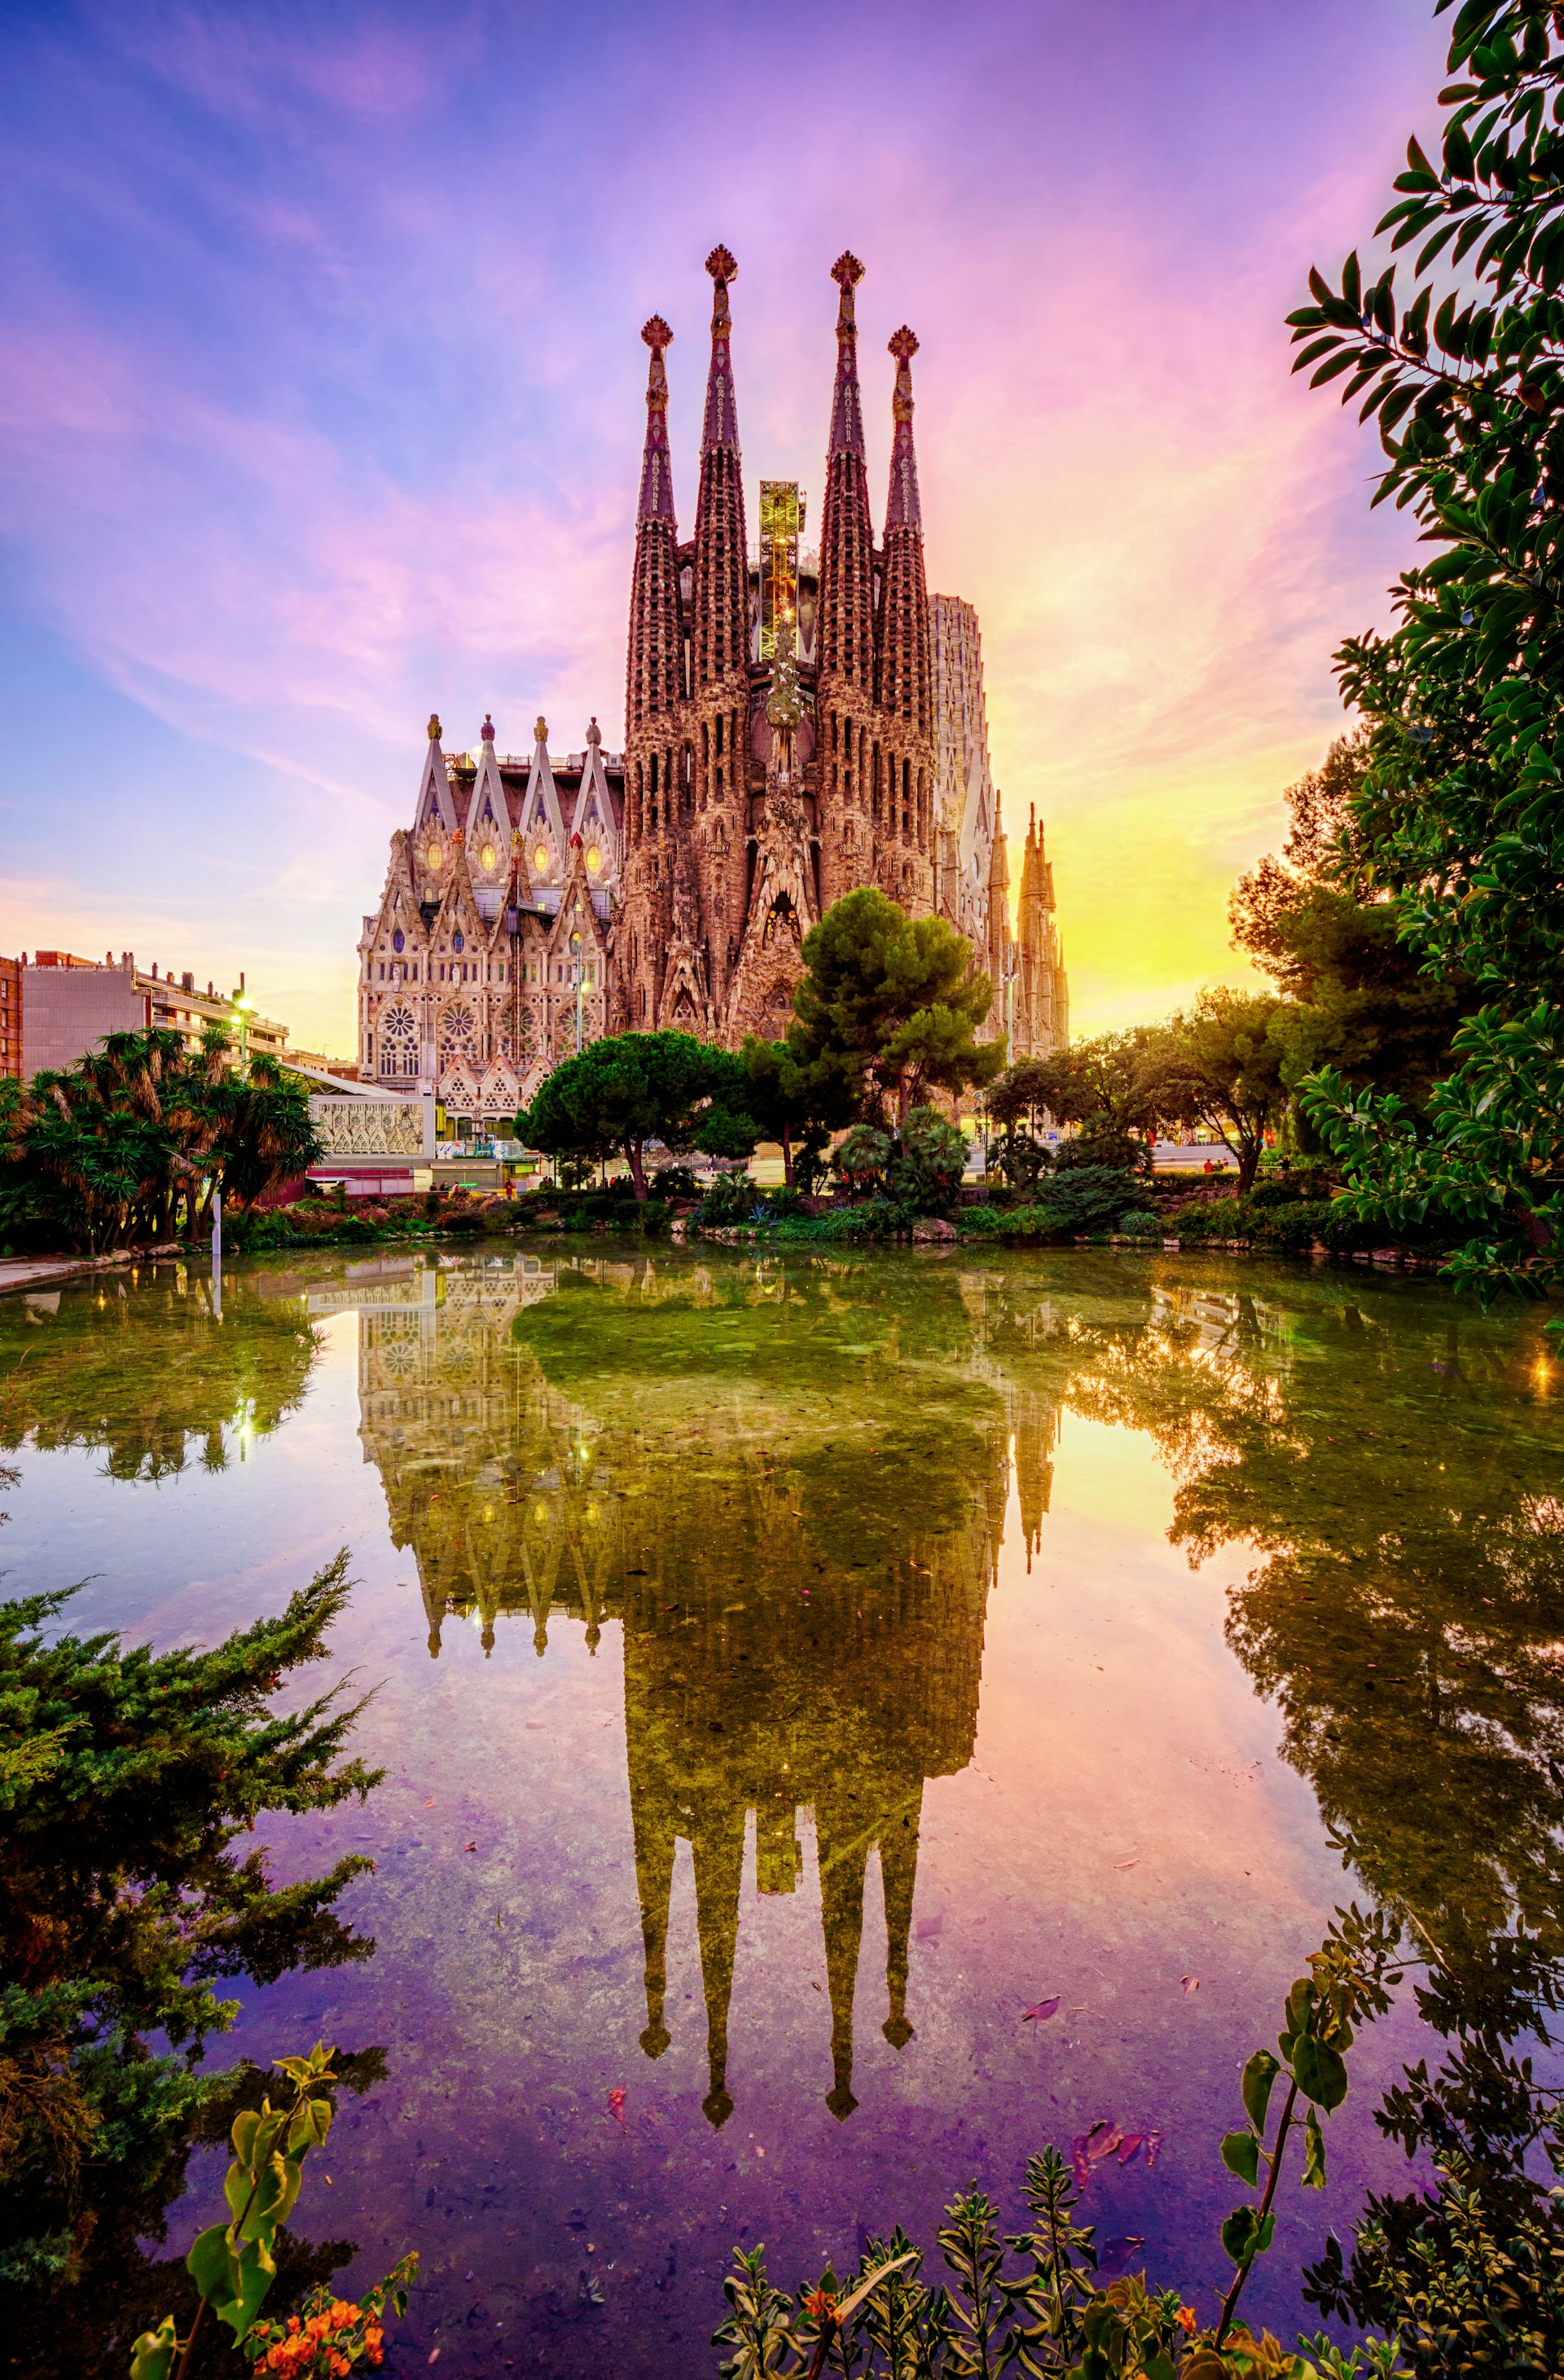 Barcelona's major sight, La Sagrada Familia, is a large church with several pointed turrets. It's photographed against a setting sun sun.